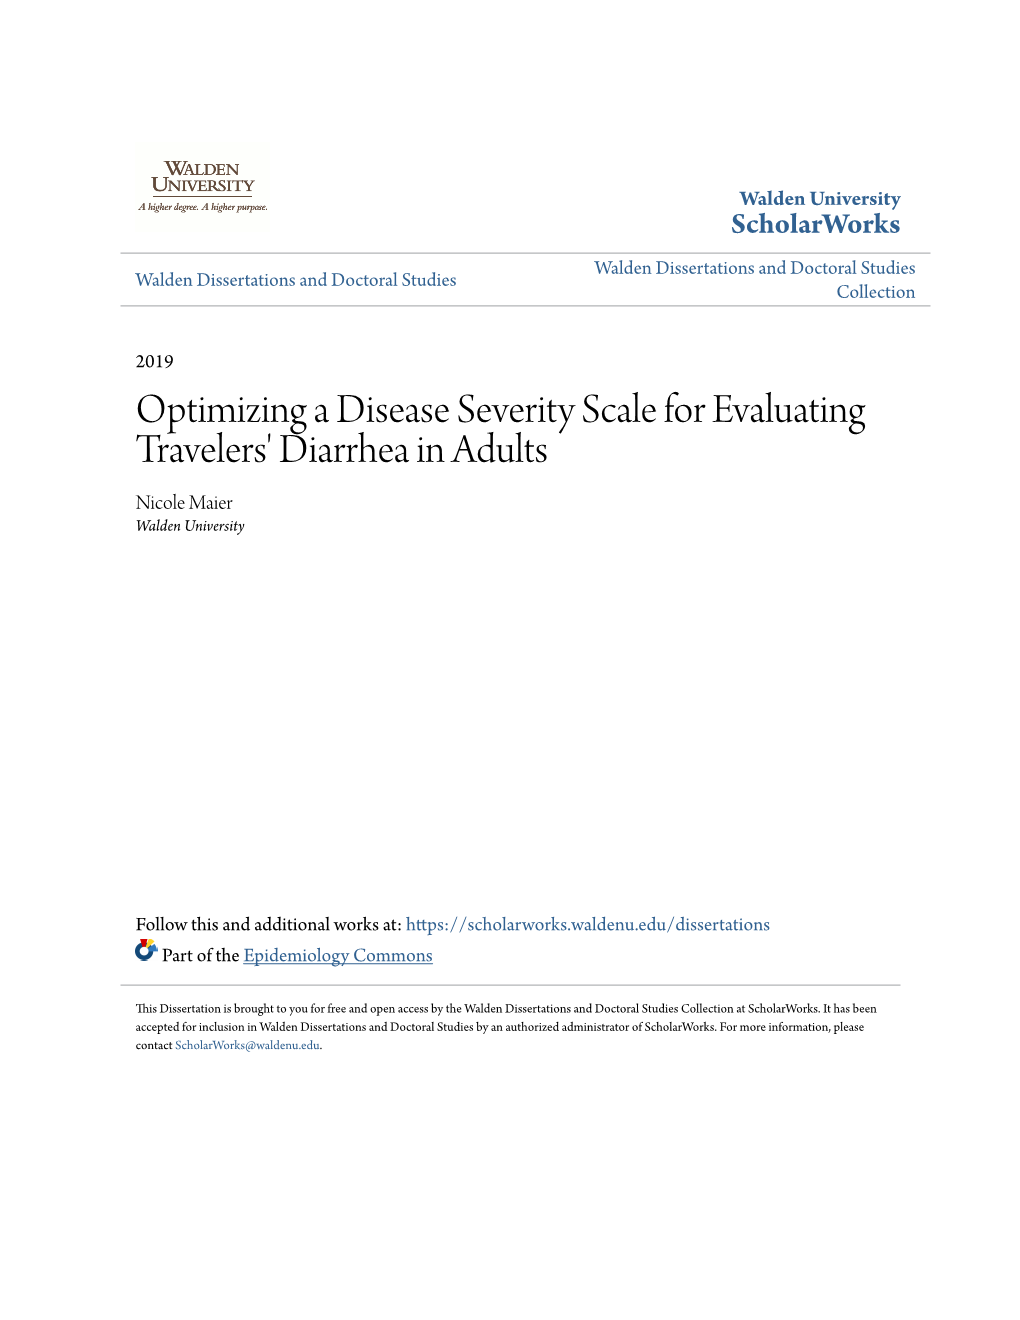 Optimizing a Disease Severity Scale for Evaluating Travelers' Diarrhea in Adults Nicole Maier Walden University